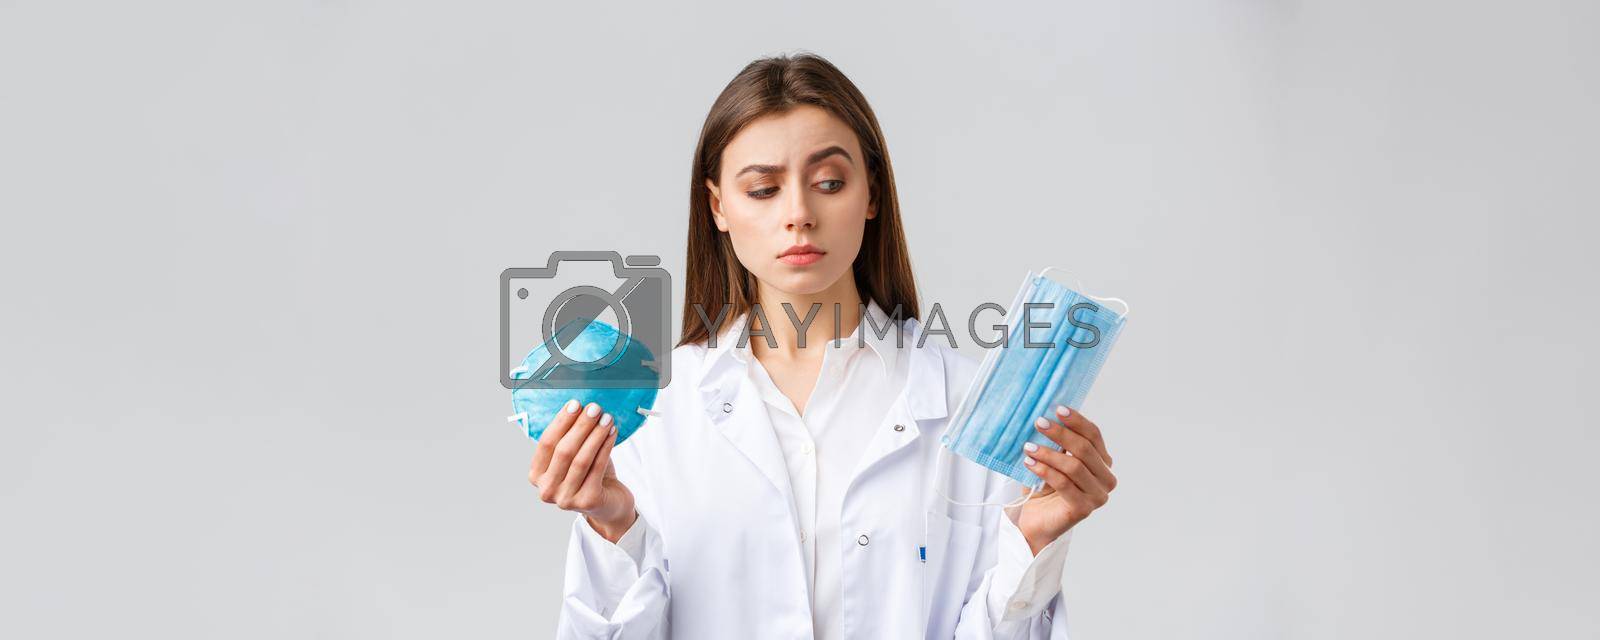 Covid-19, preventing virus, healthcare workers and quarantine concept. Cute female doctor in white scrubs, choosing between medical mask and respirator, pick personal protective equipment.